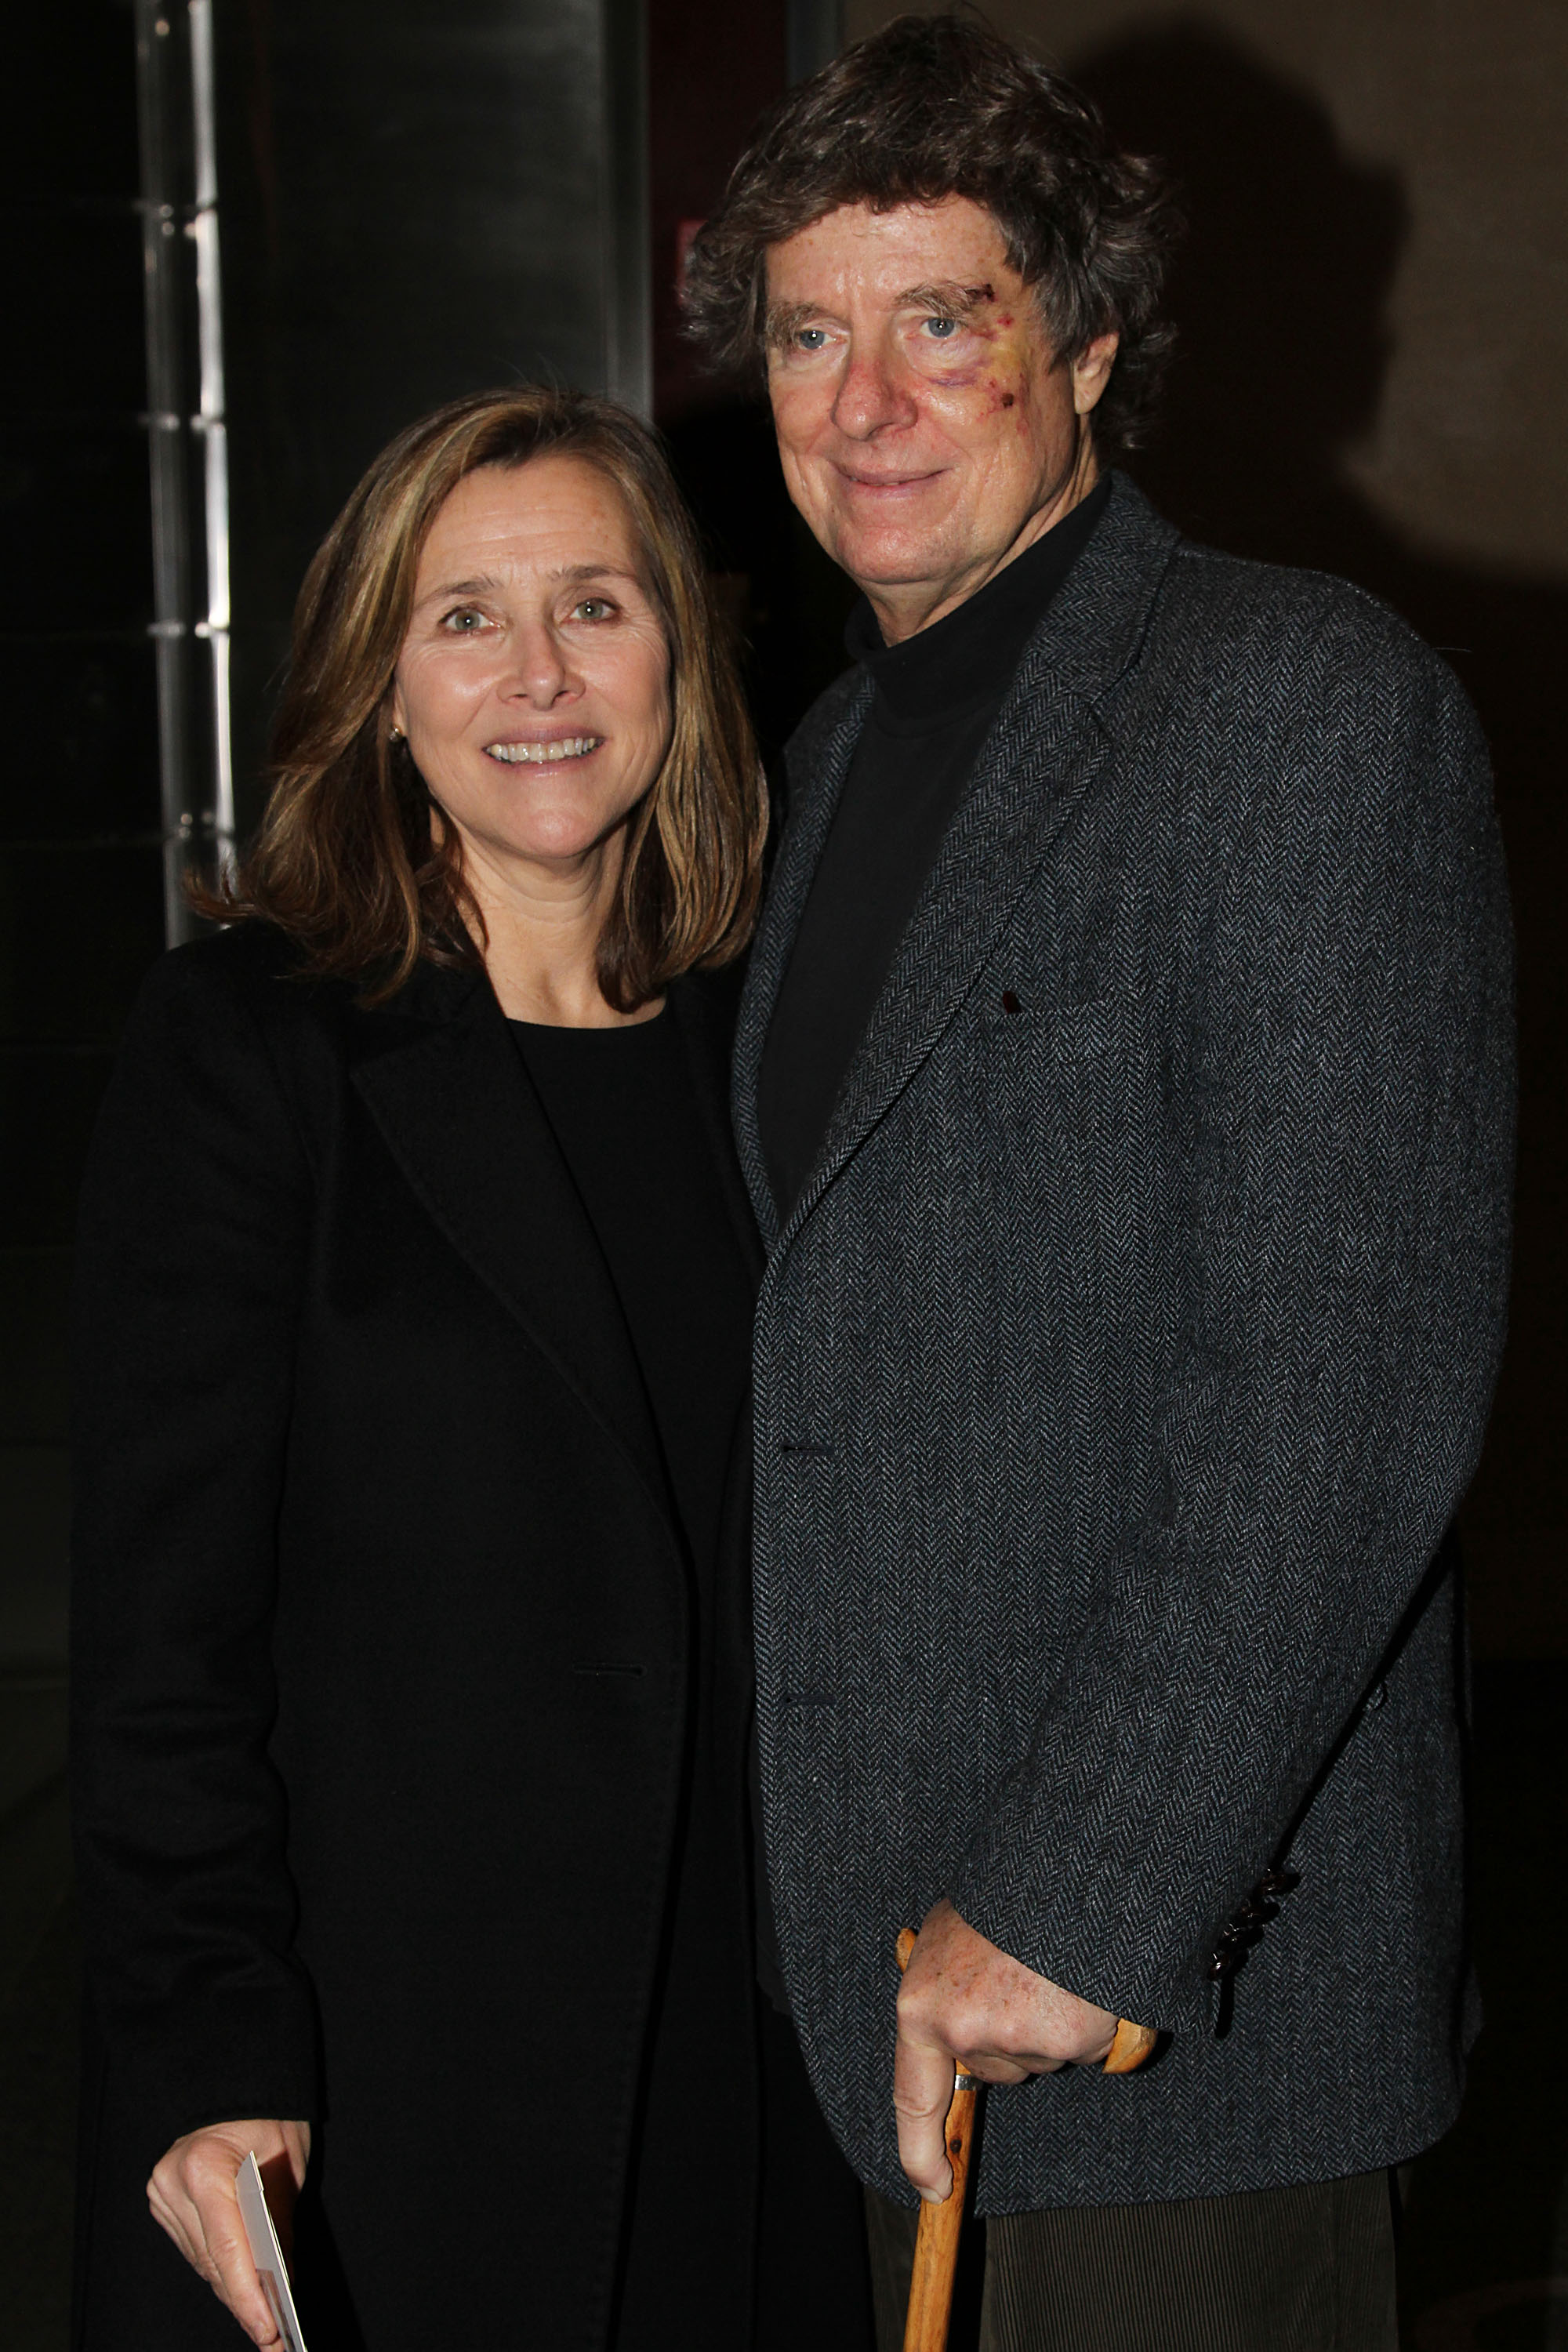 Meredith Vieira and Richard Cohen attend the Andy Rooney Memorial at Jazz at Lincoln Center in New York City on January 12, 2012. | Source: Getty Images